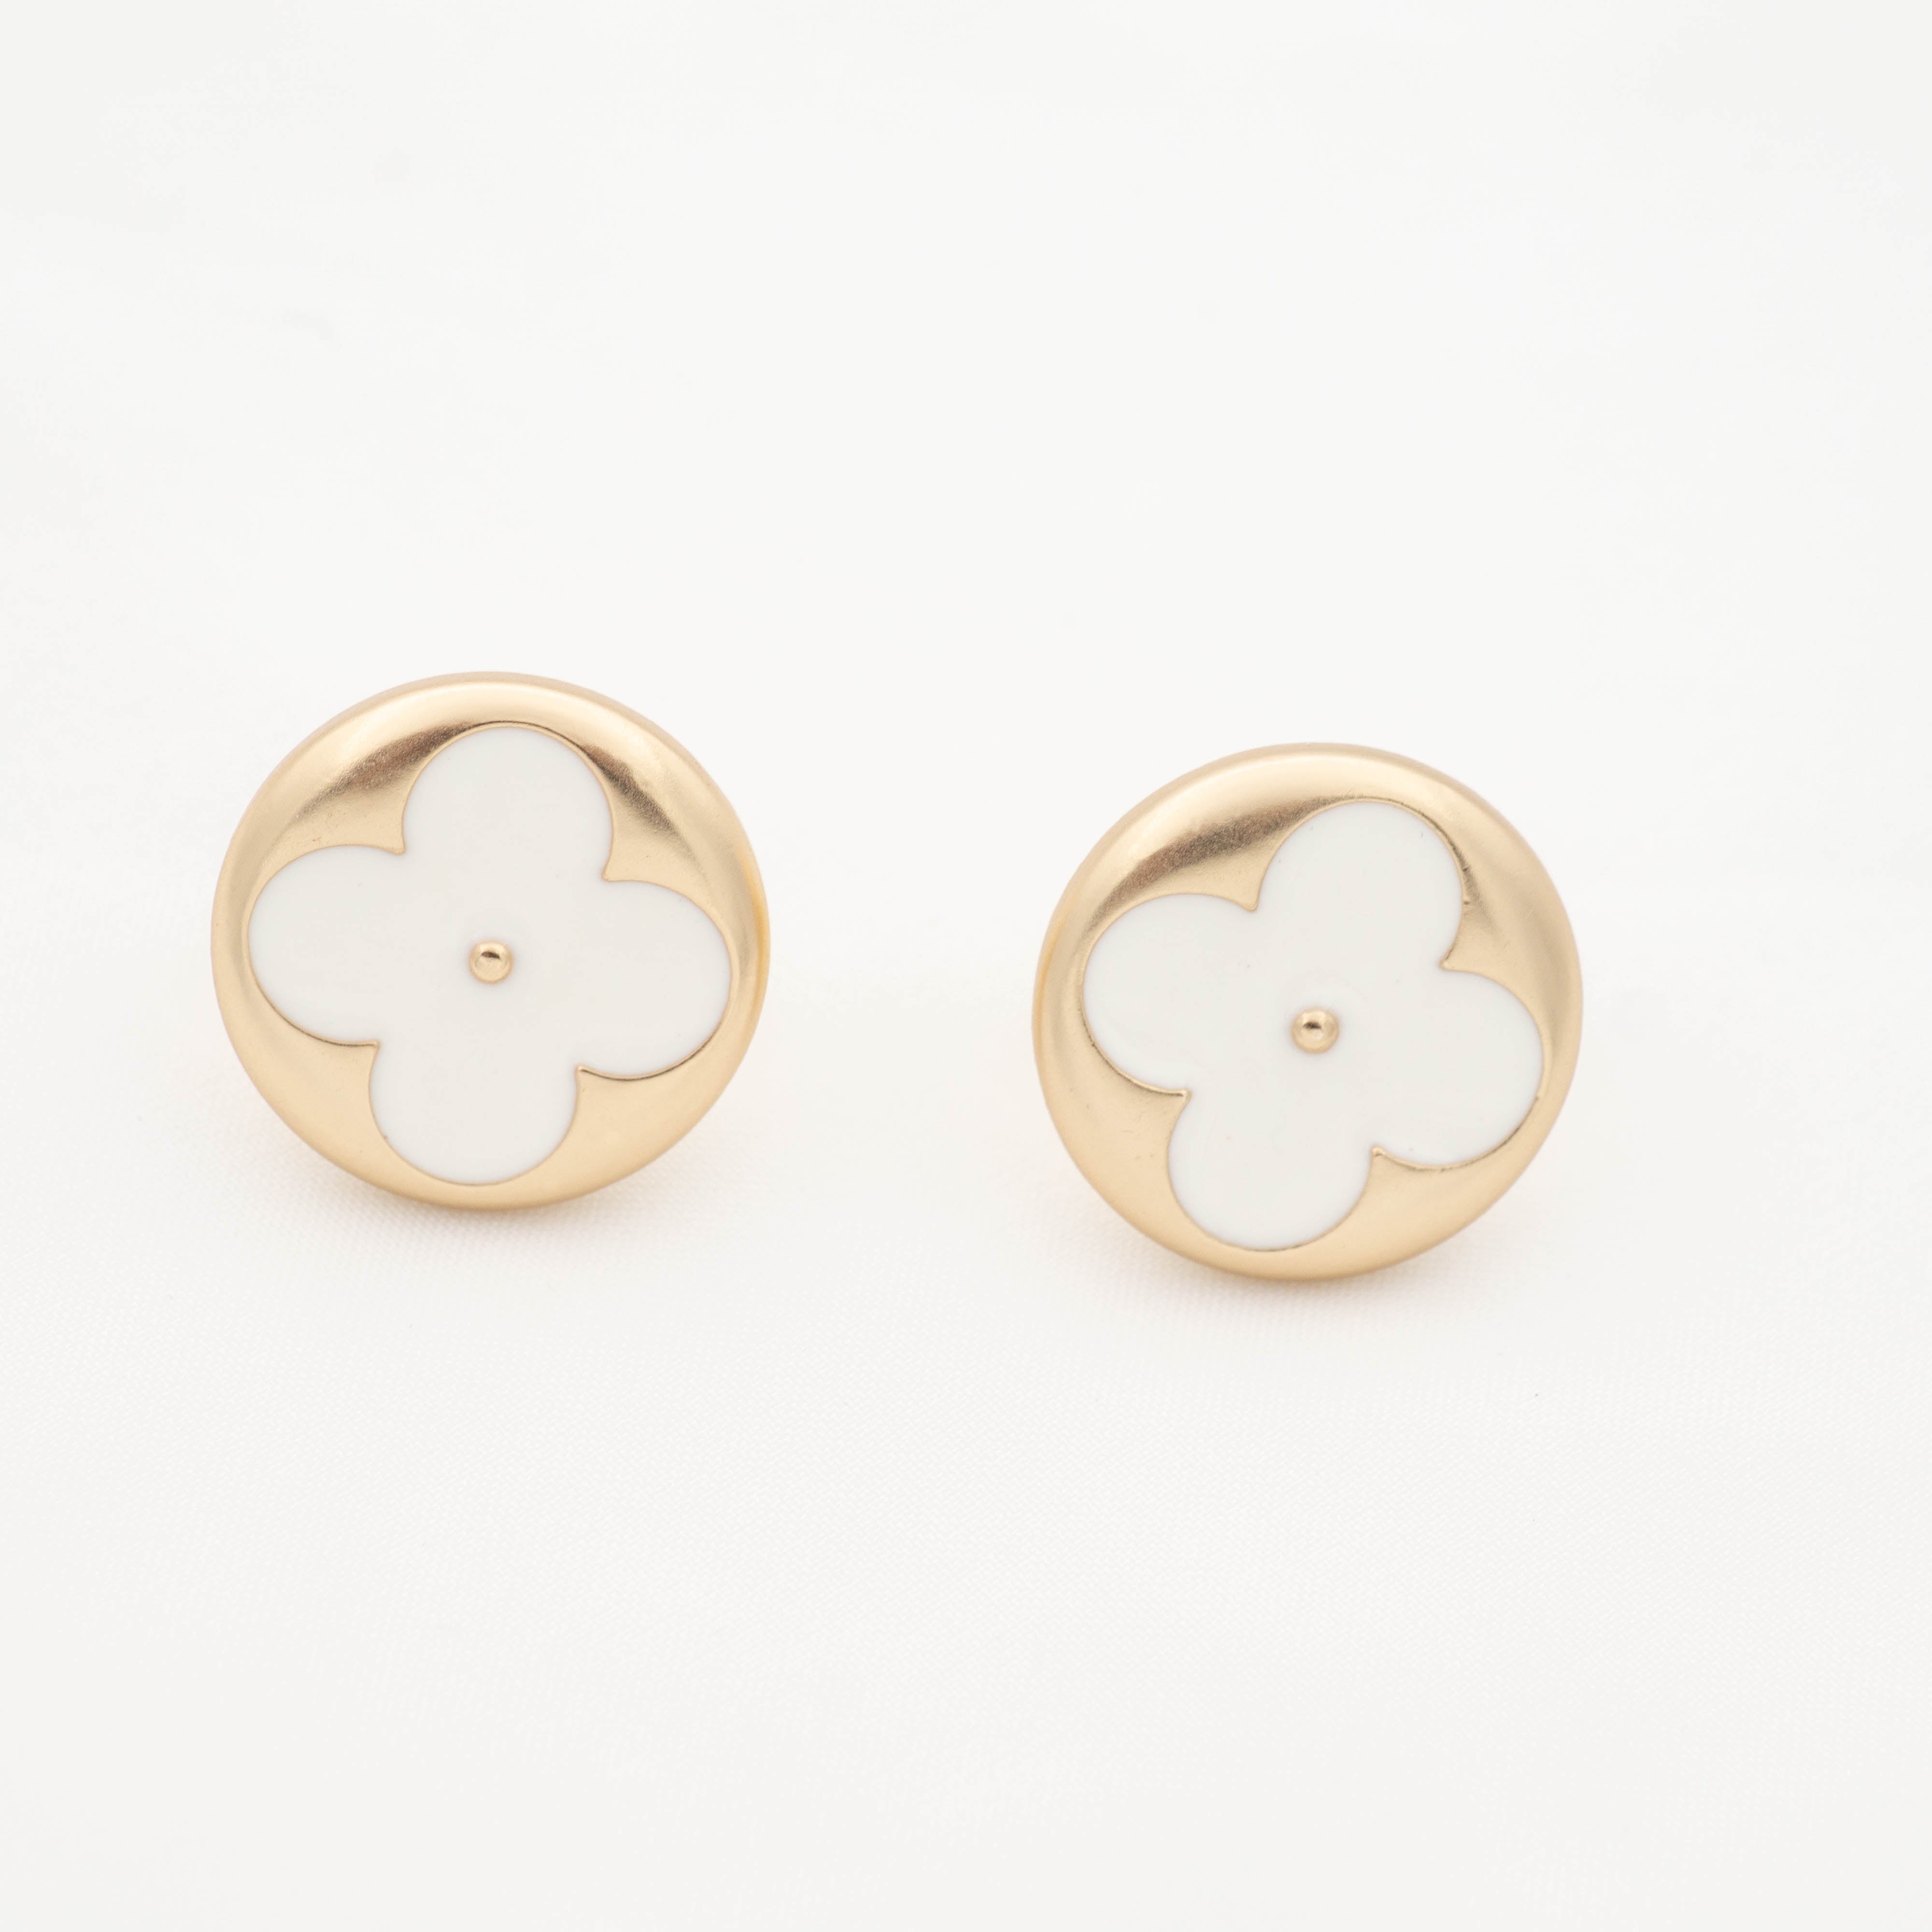 Repurposed Designer Jewelry Louis Vuitton Button Earrings with White  Blossoms